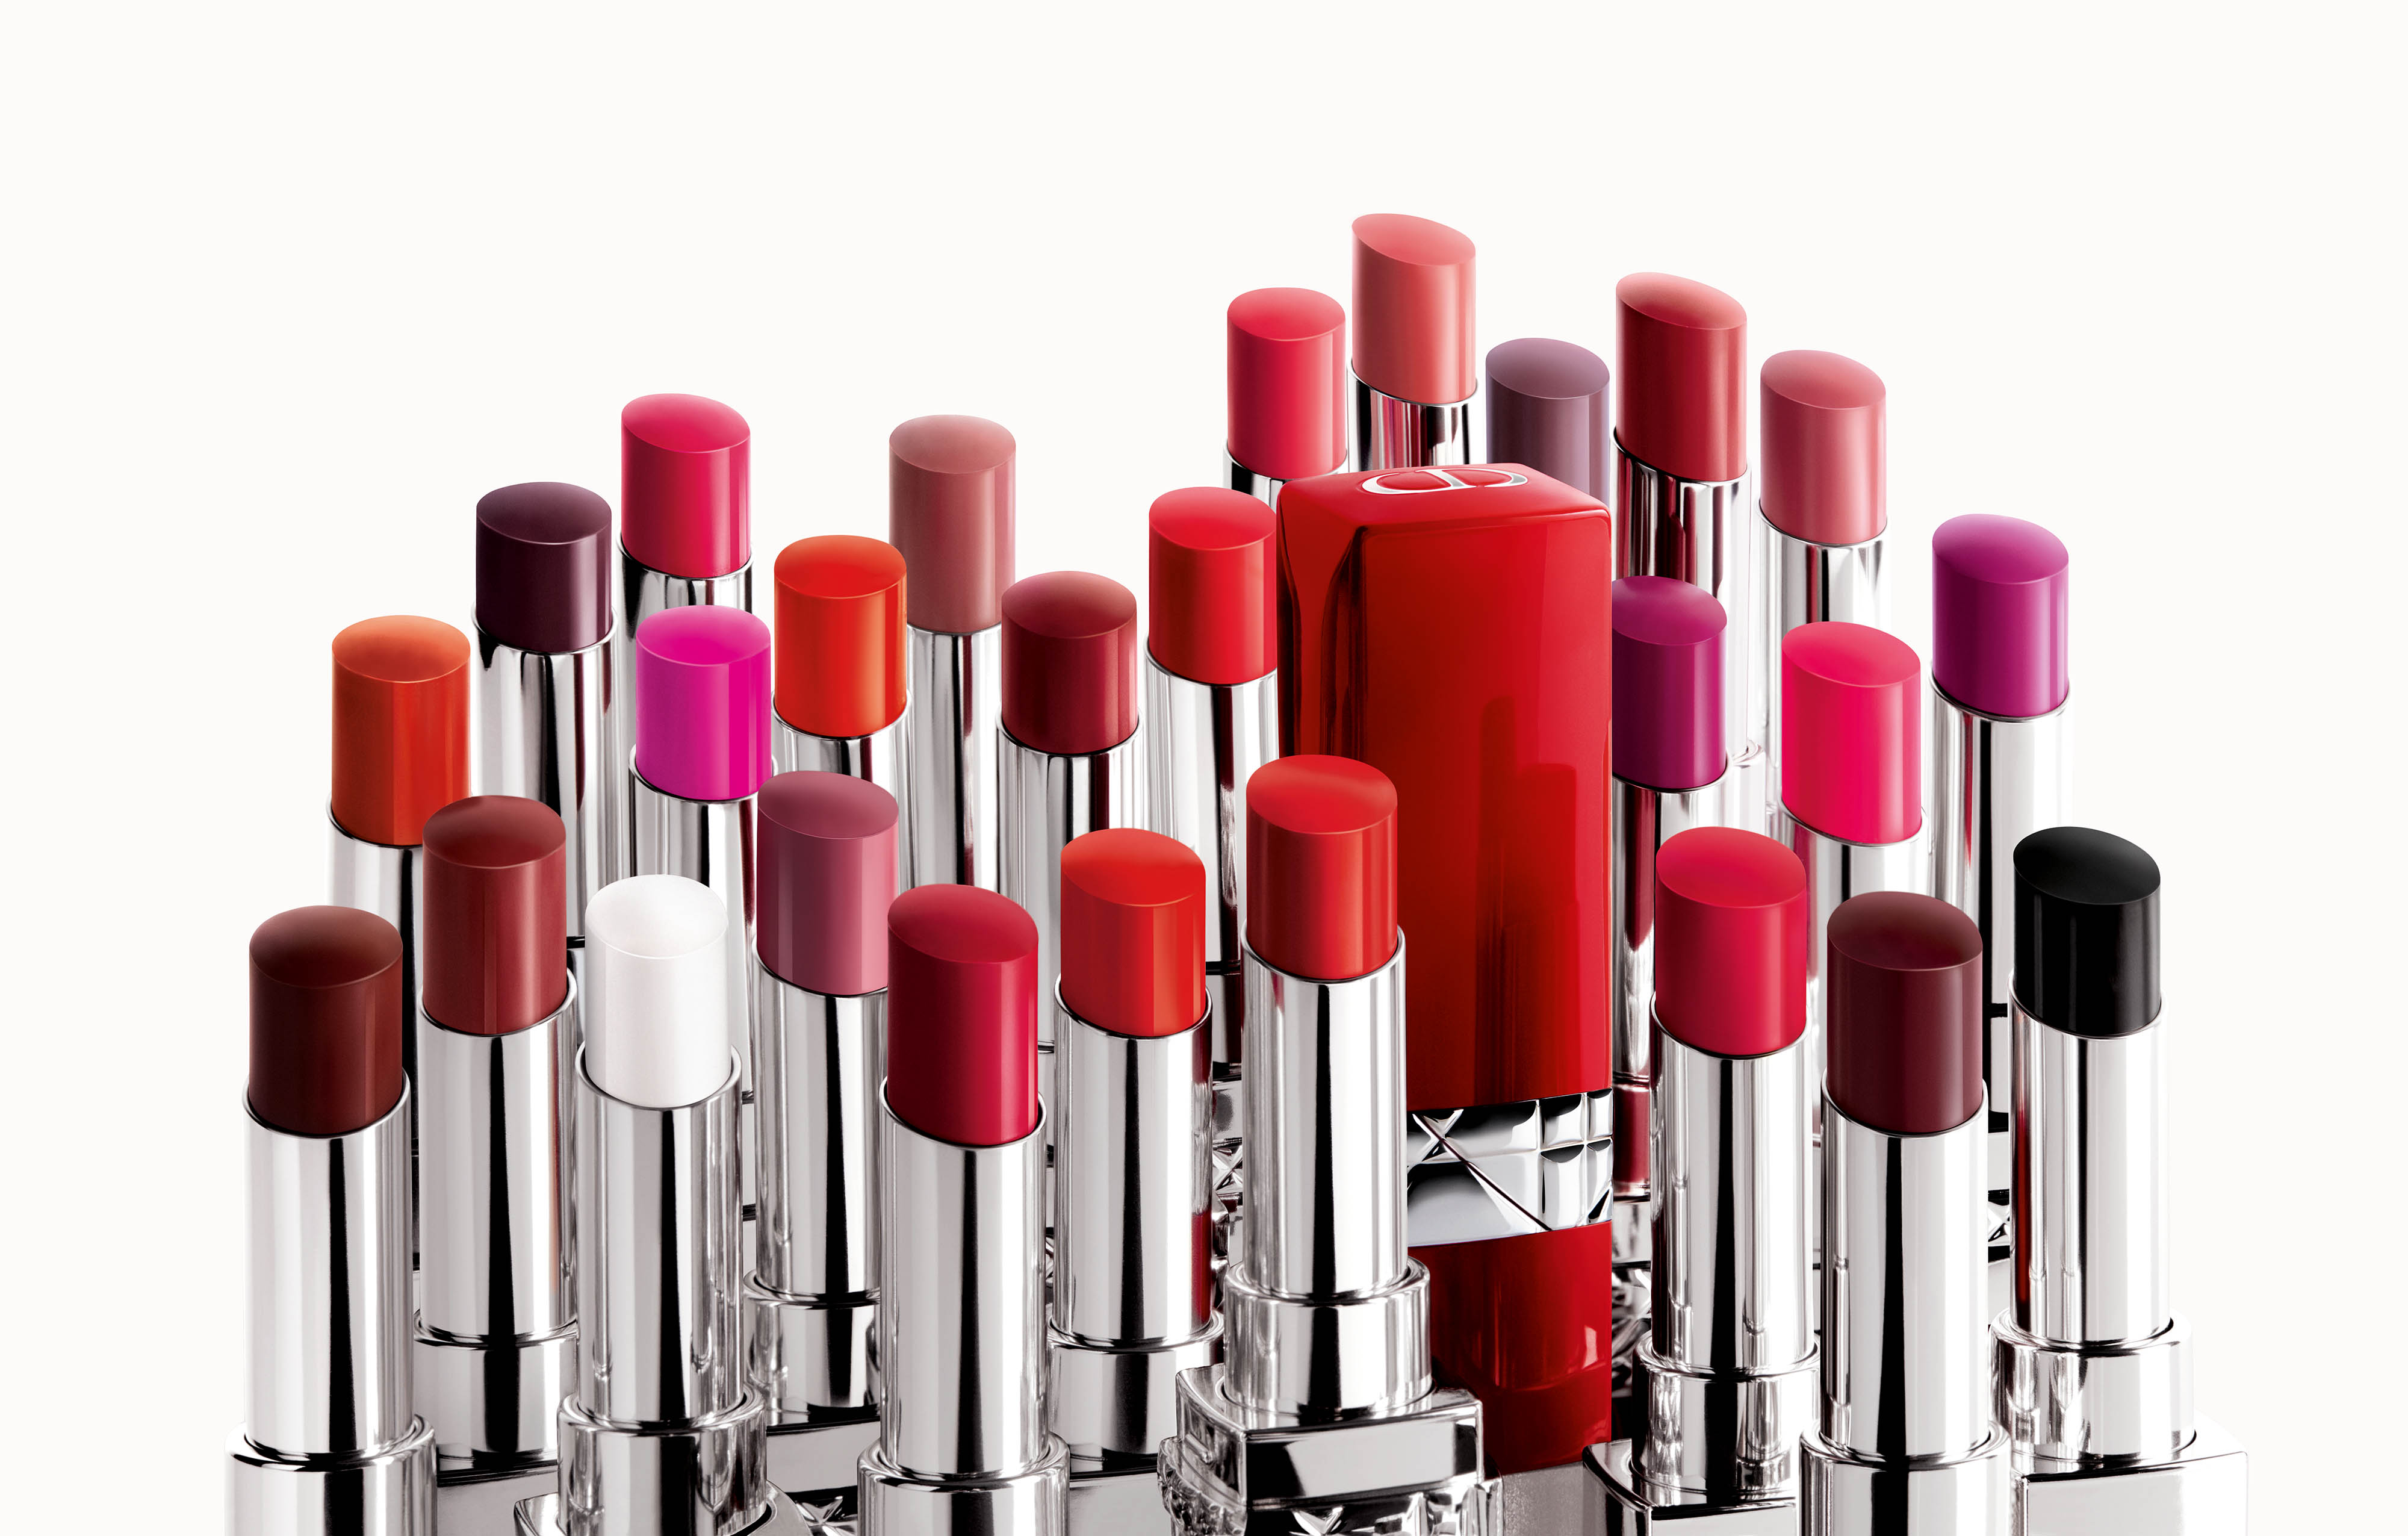 The Rouge Dior Ultra Rouge collection